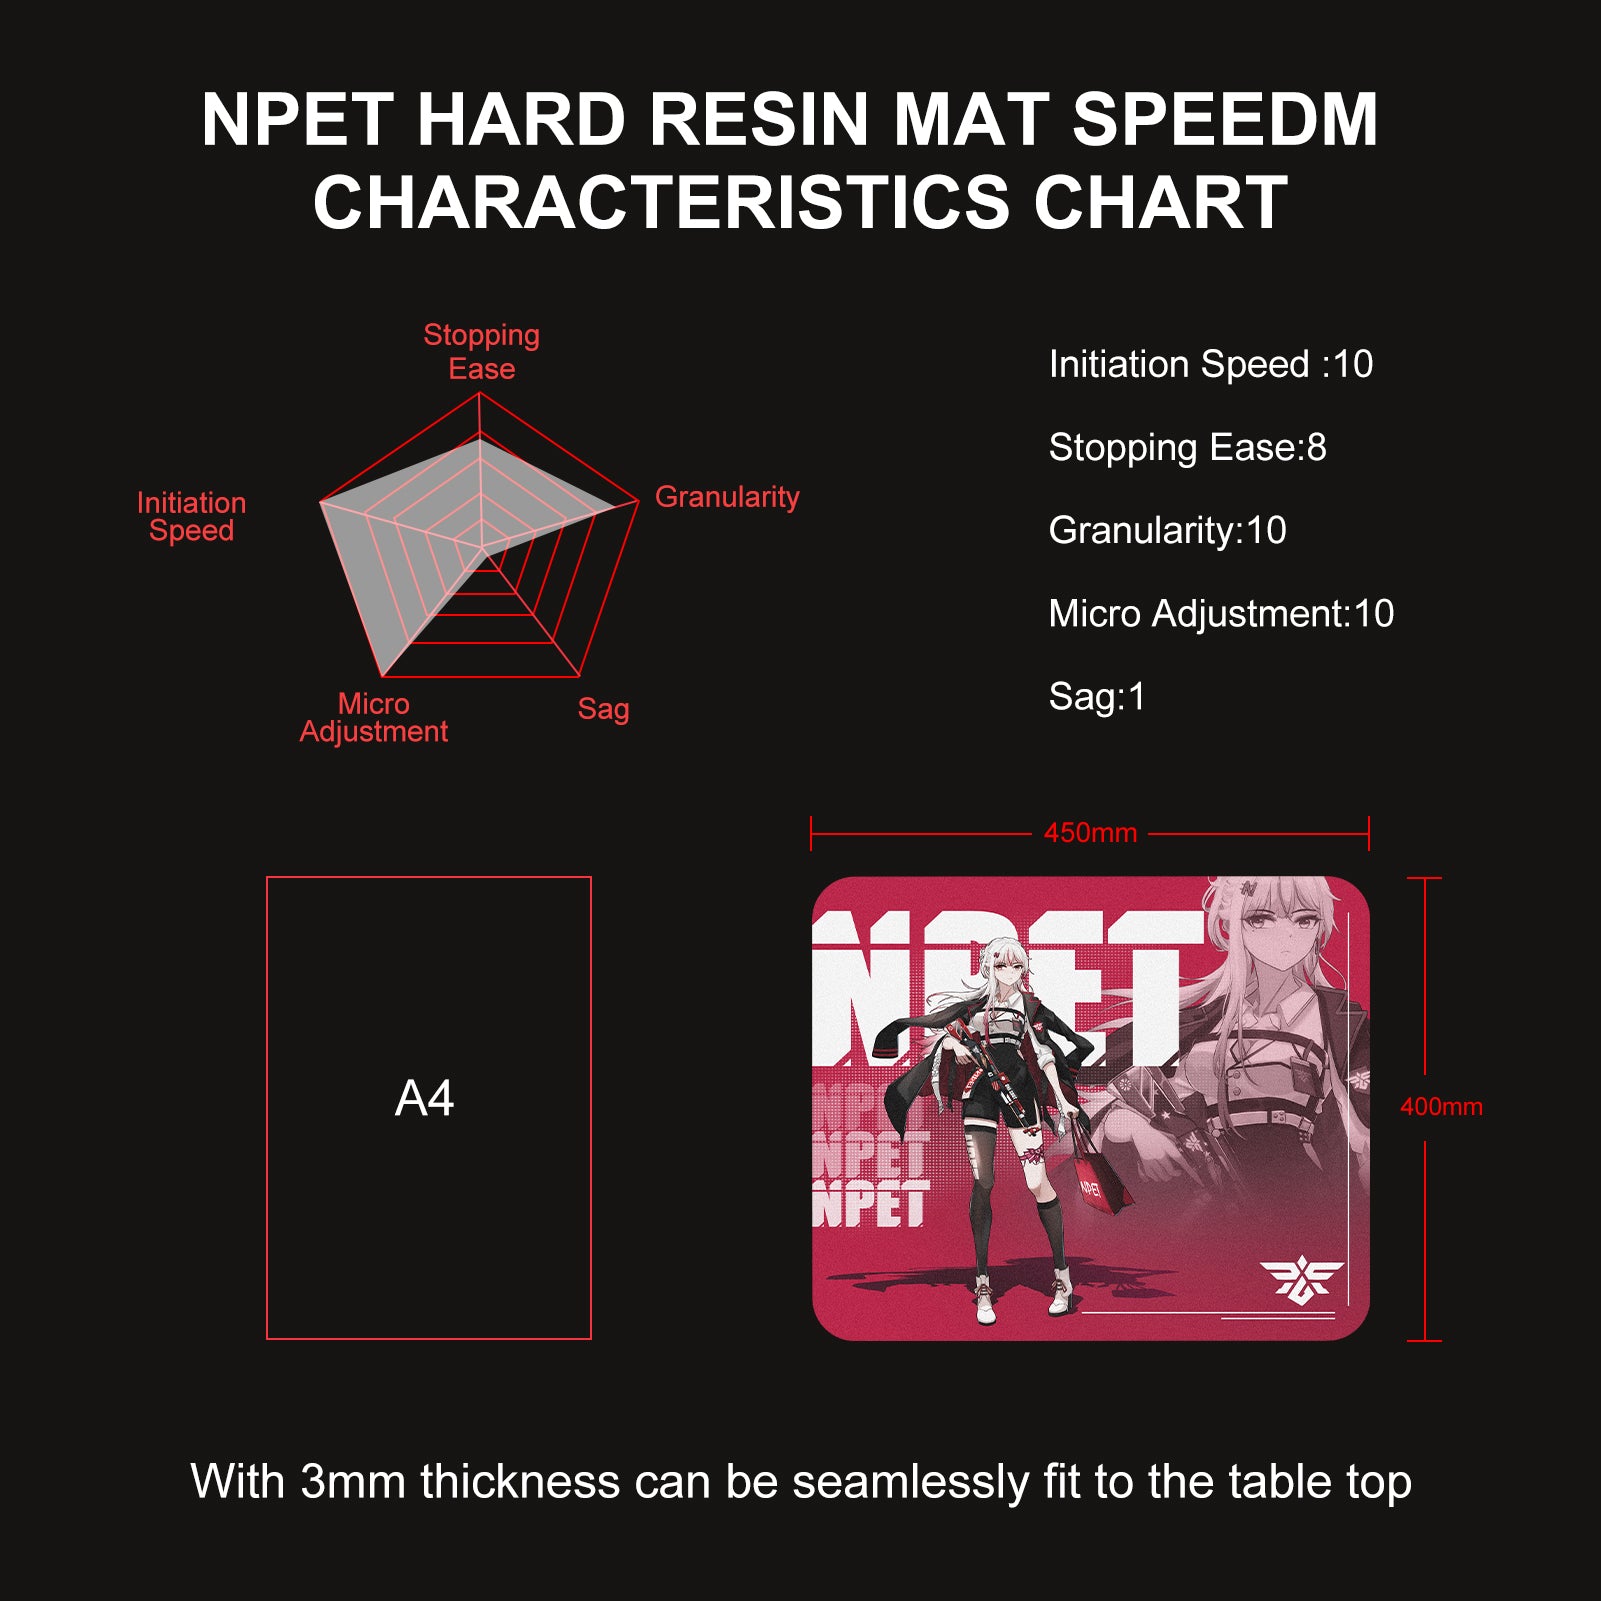 NPET SPEEDM Gaming Mousepad - Resin Surface Hard Gaming Mouse pad,Balanced Control & Speed, No Smell Waterproof Mouse Mat for Esports Gamers [Hard/Fast] Grey, Large